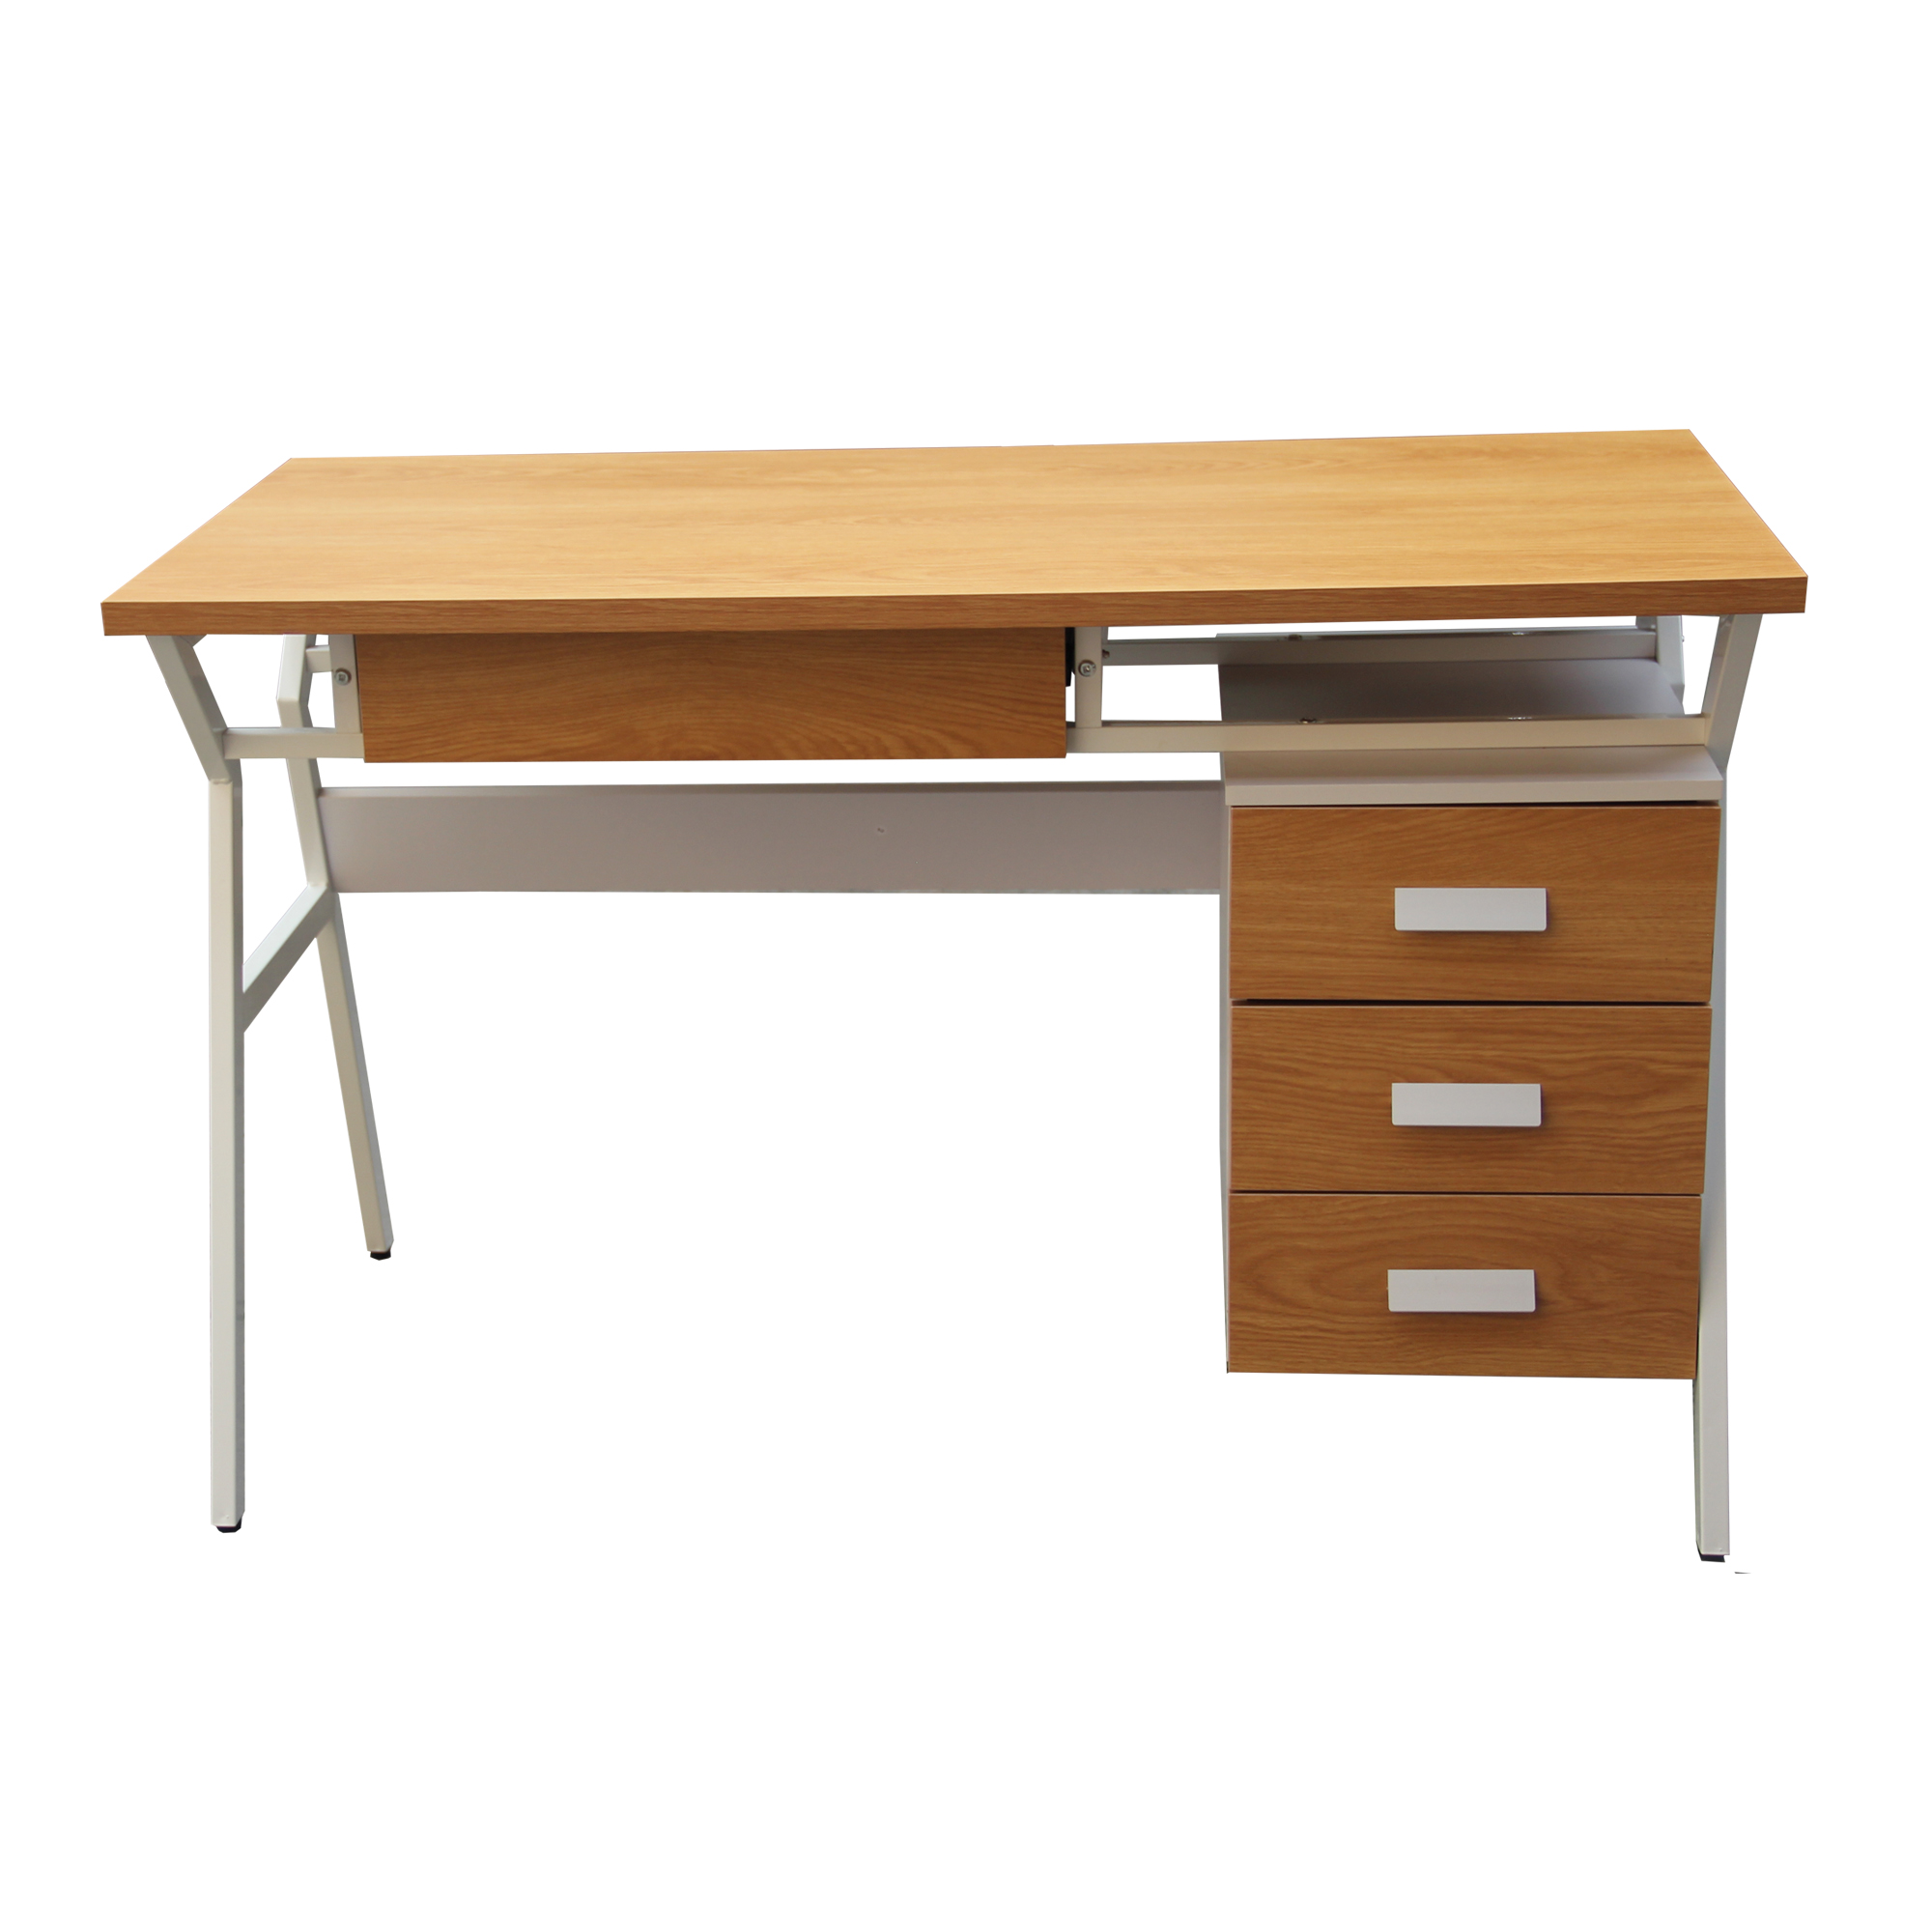 Lorie Office Table - Hapihomes Finiture Inc.